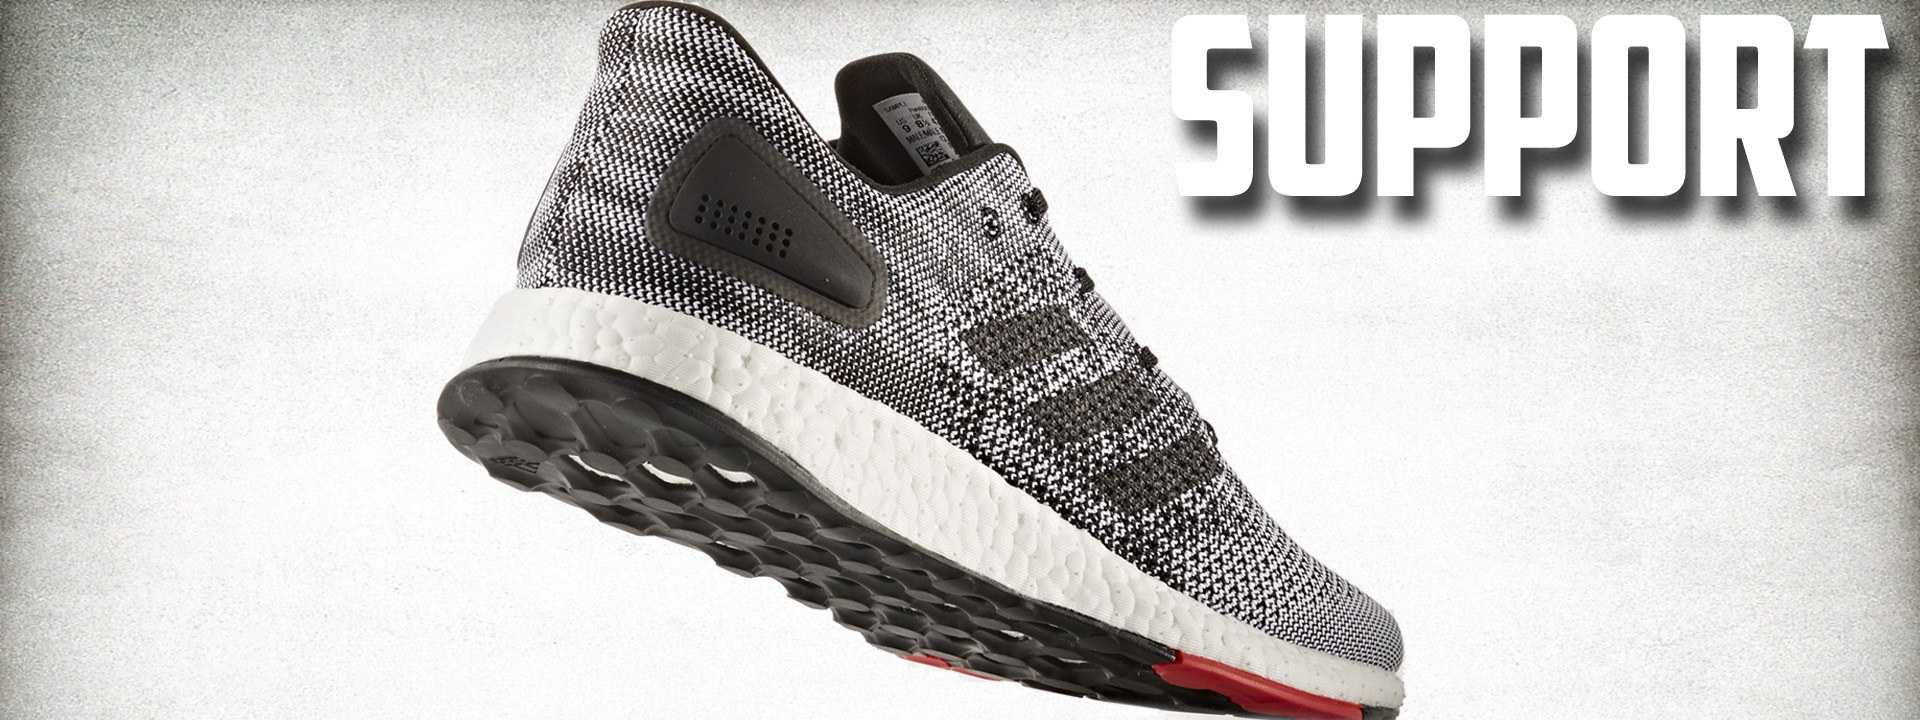 adidas PureBoost DPR | Detailed Look and Review -